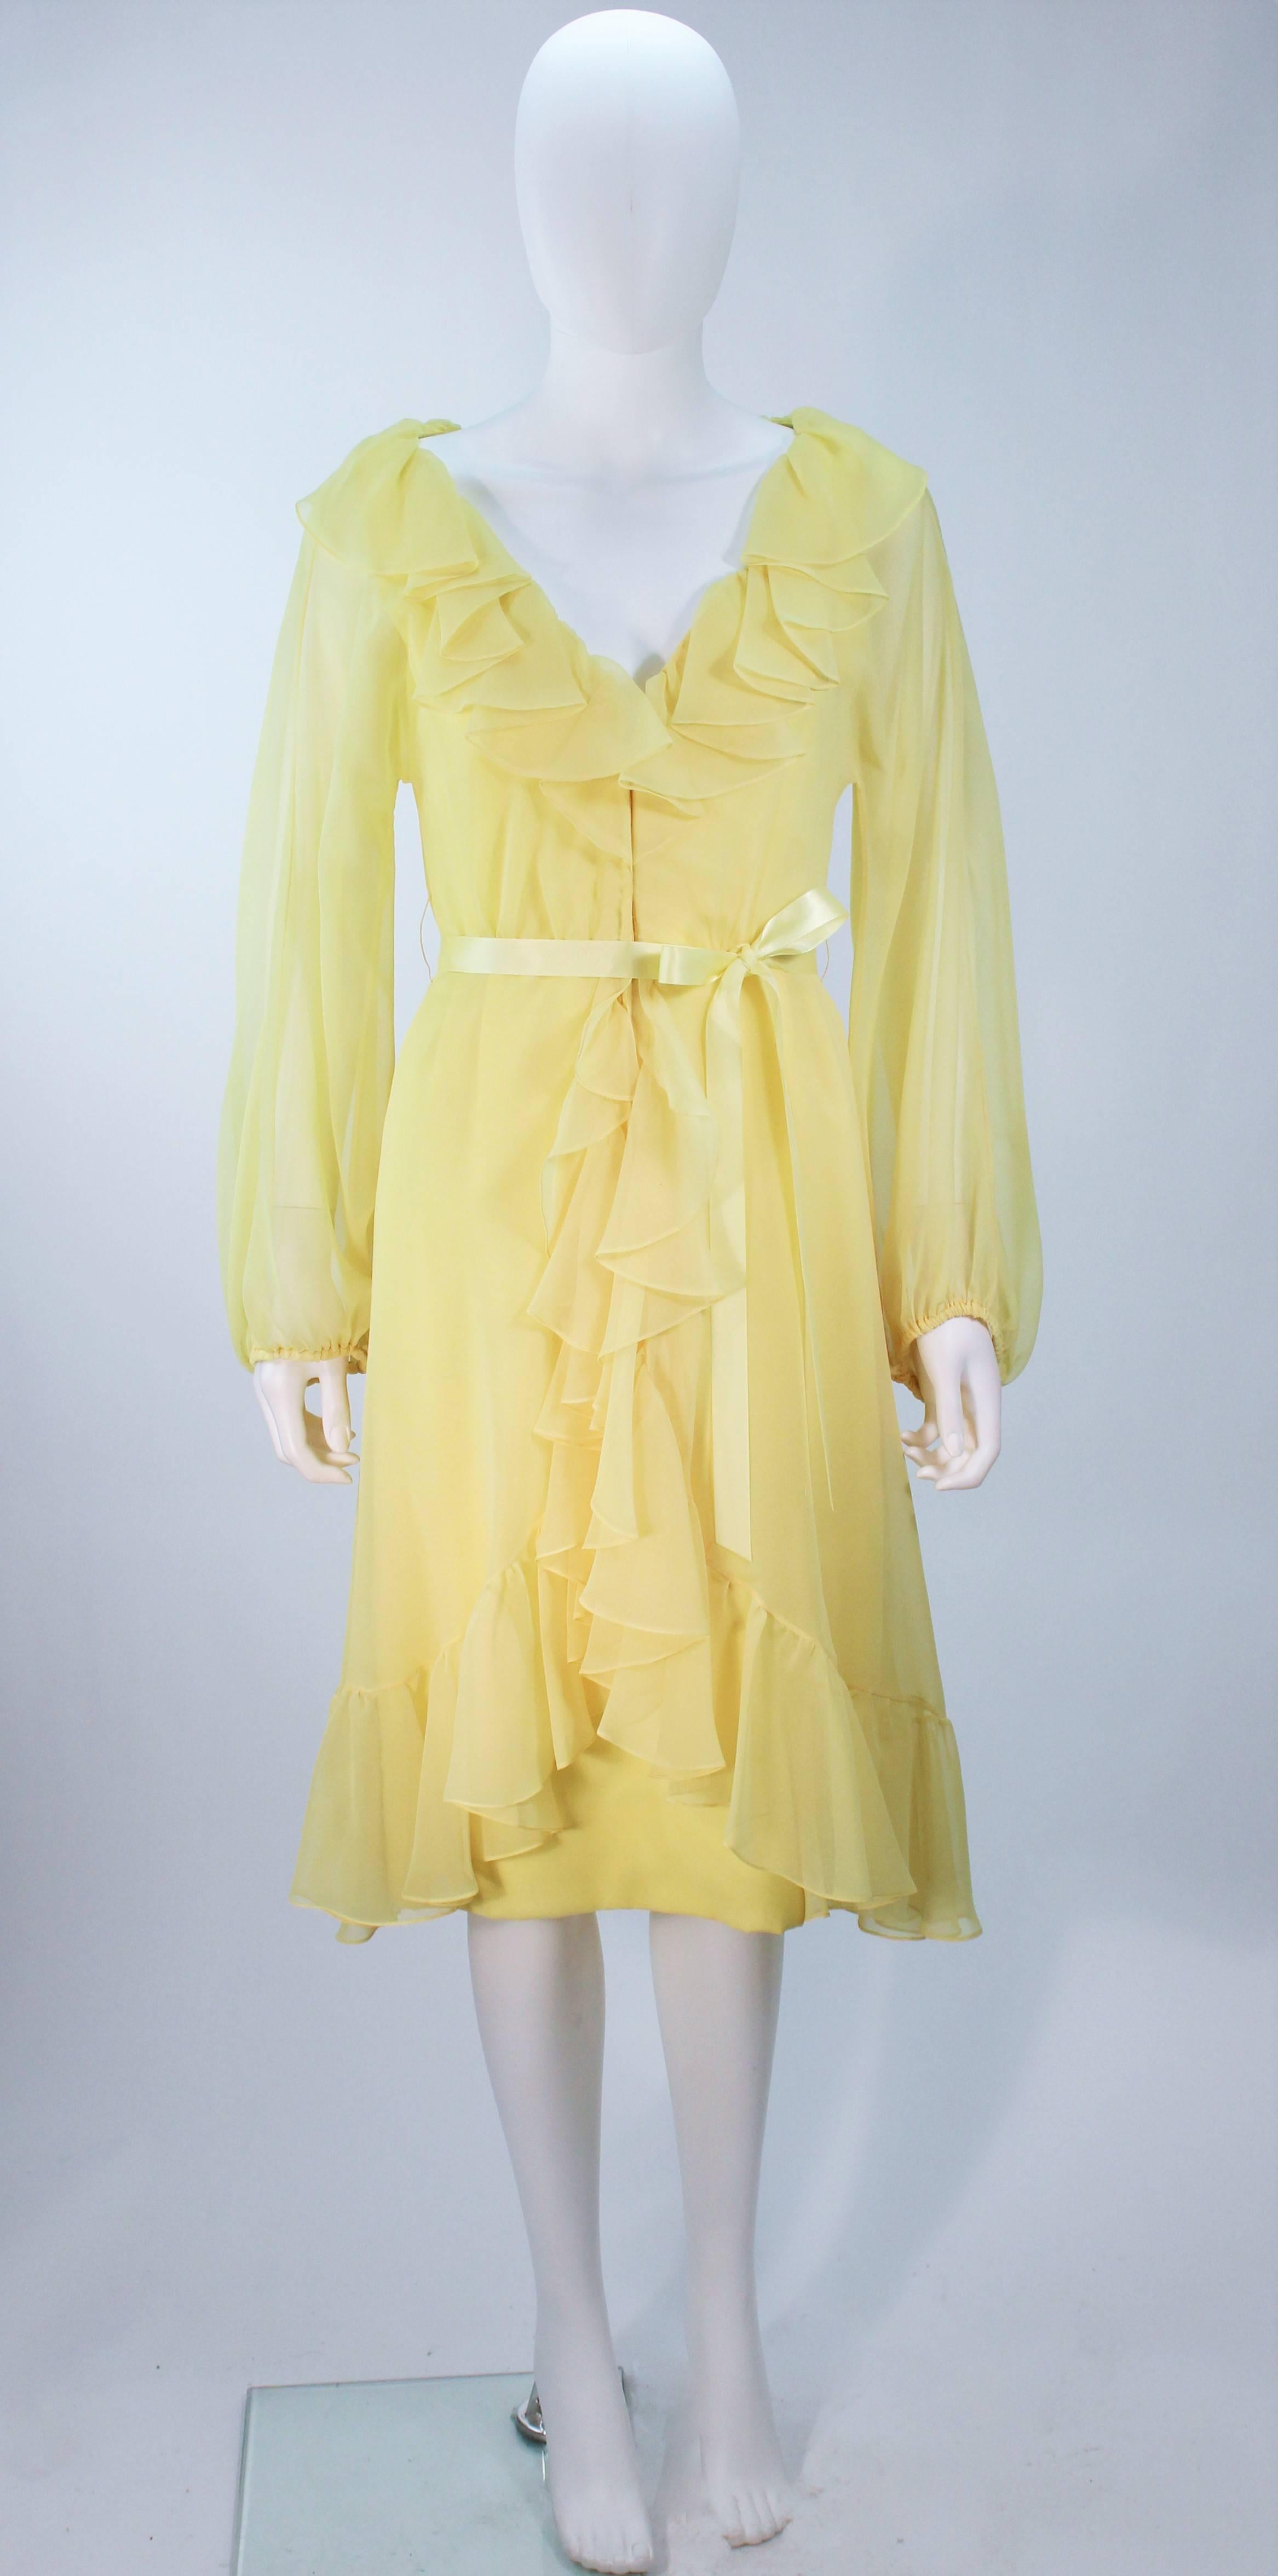  This Travilla dress is composed of a yellow chiffon. Features a ruffled neckline and billowed sleeves. There is a zipper closure with hook and eye. In great vintage condition, there are discolorations (see photos). 

  **Please cross-reference